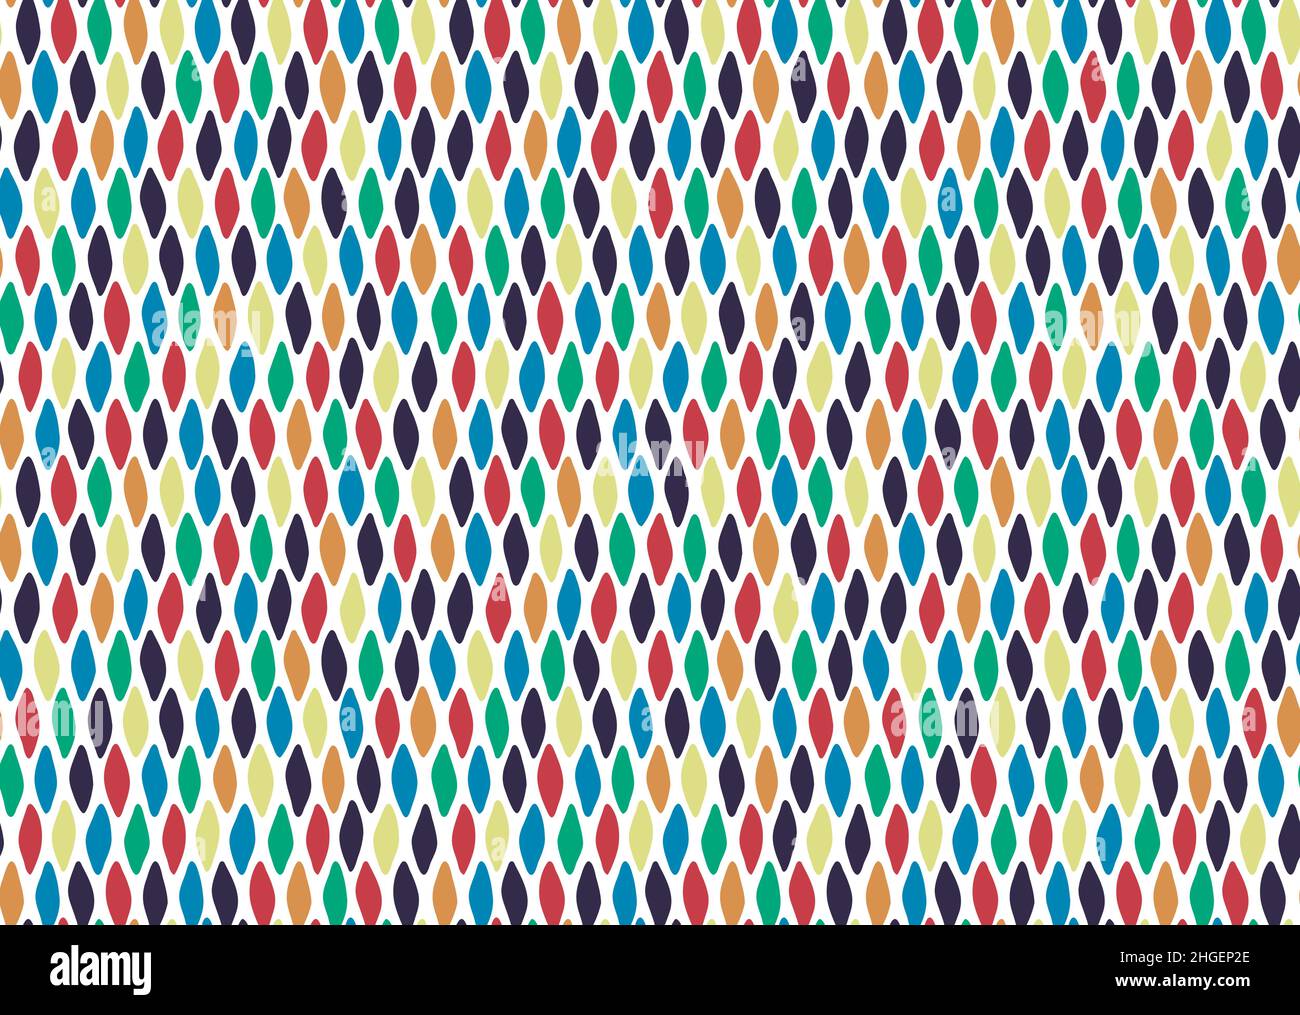 Carnival seamless pattern. Geometrical chaotic colored grid, hand drawn rhomb shapes. White color background. Vector Stock Vector